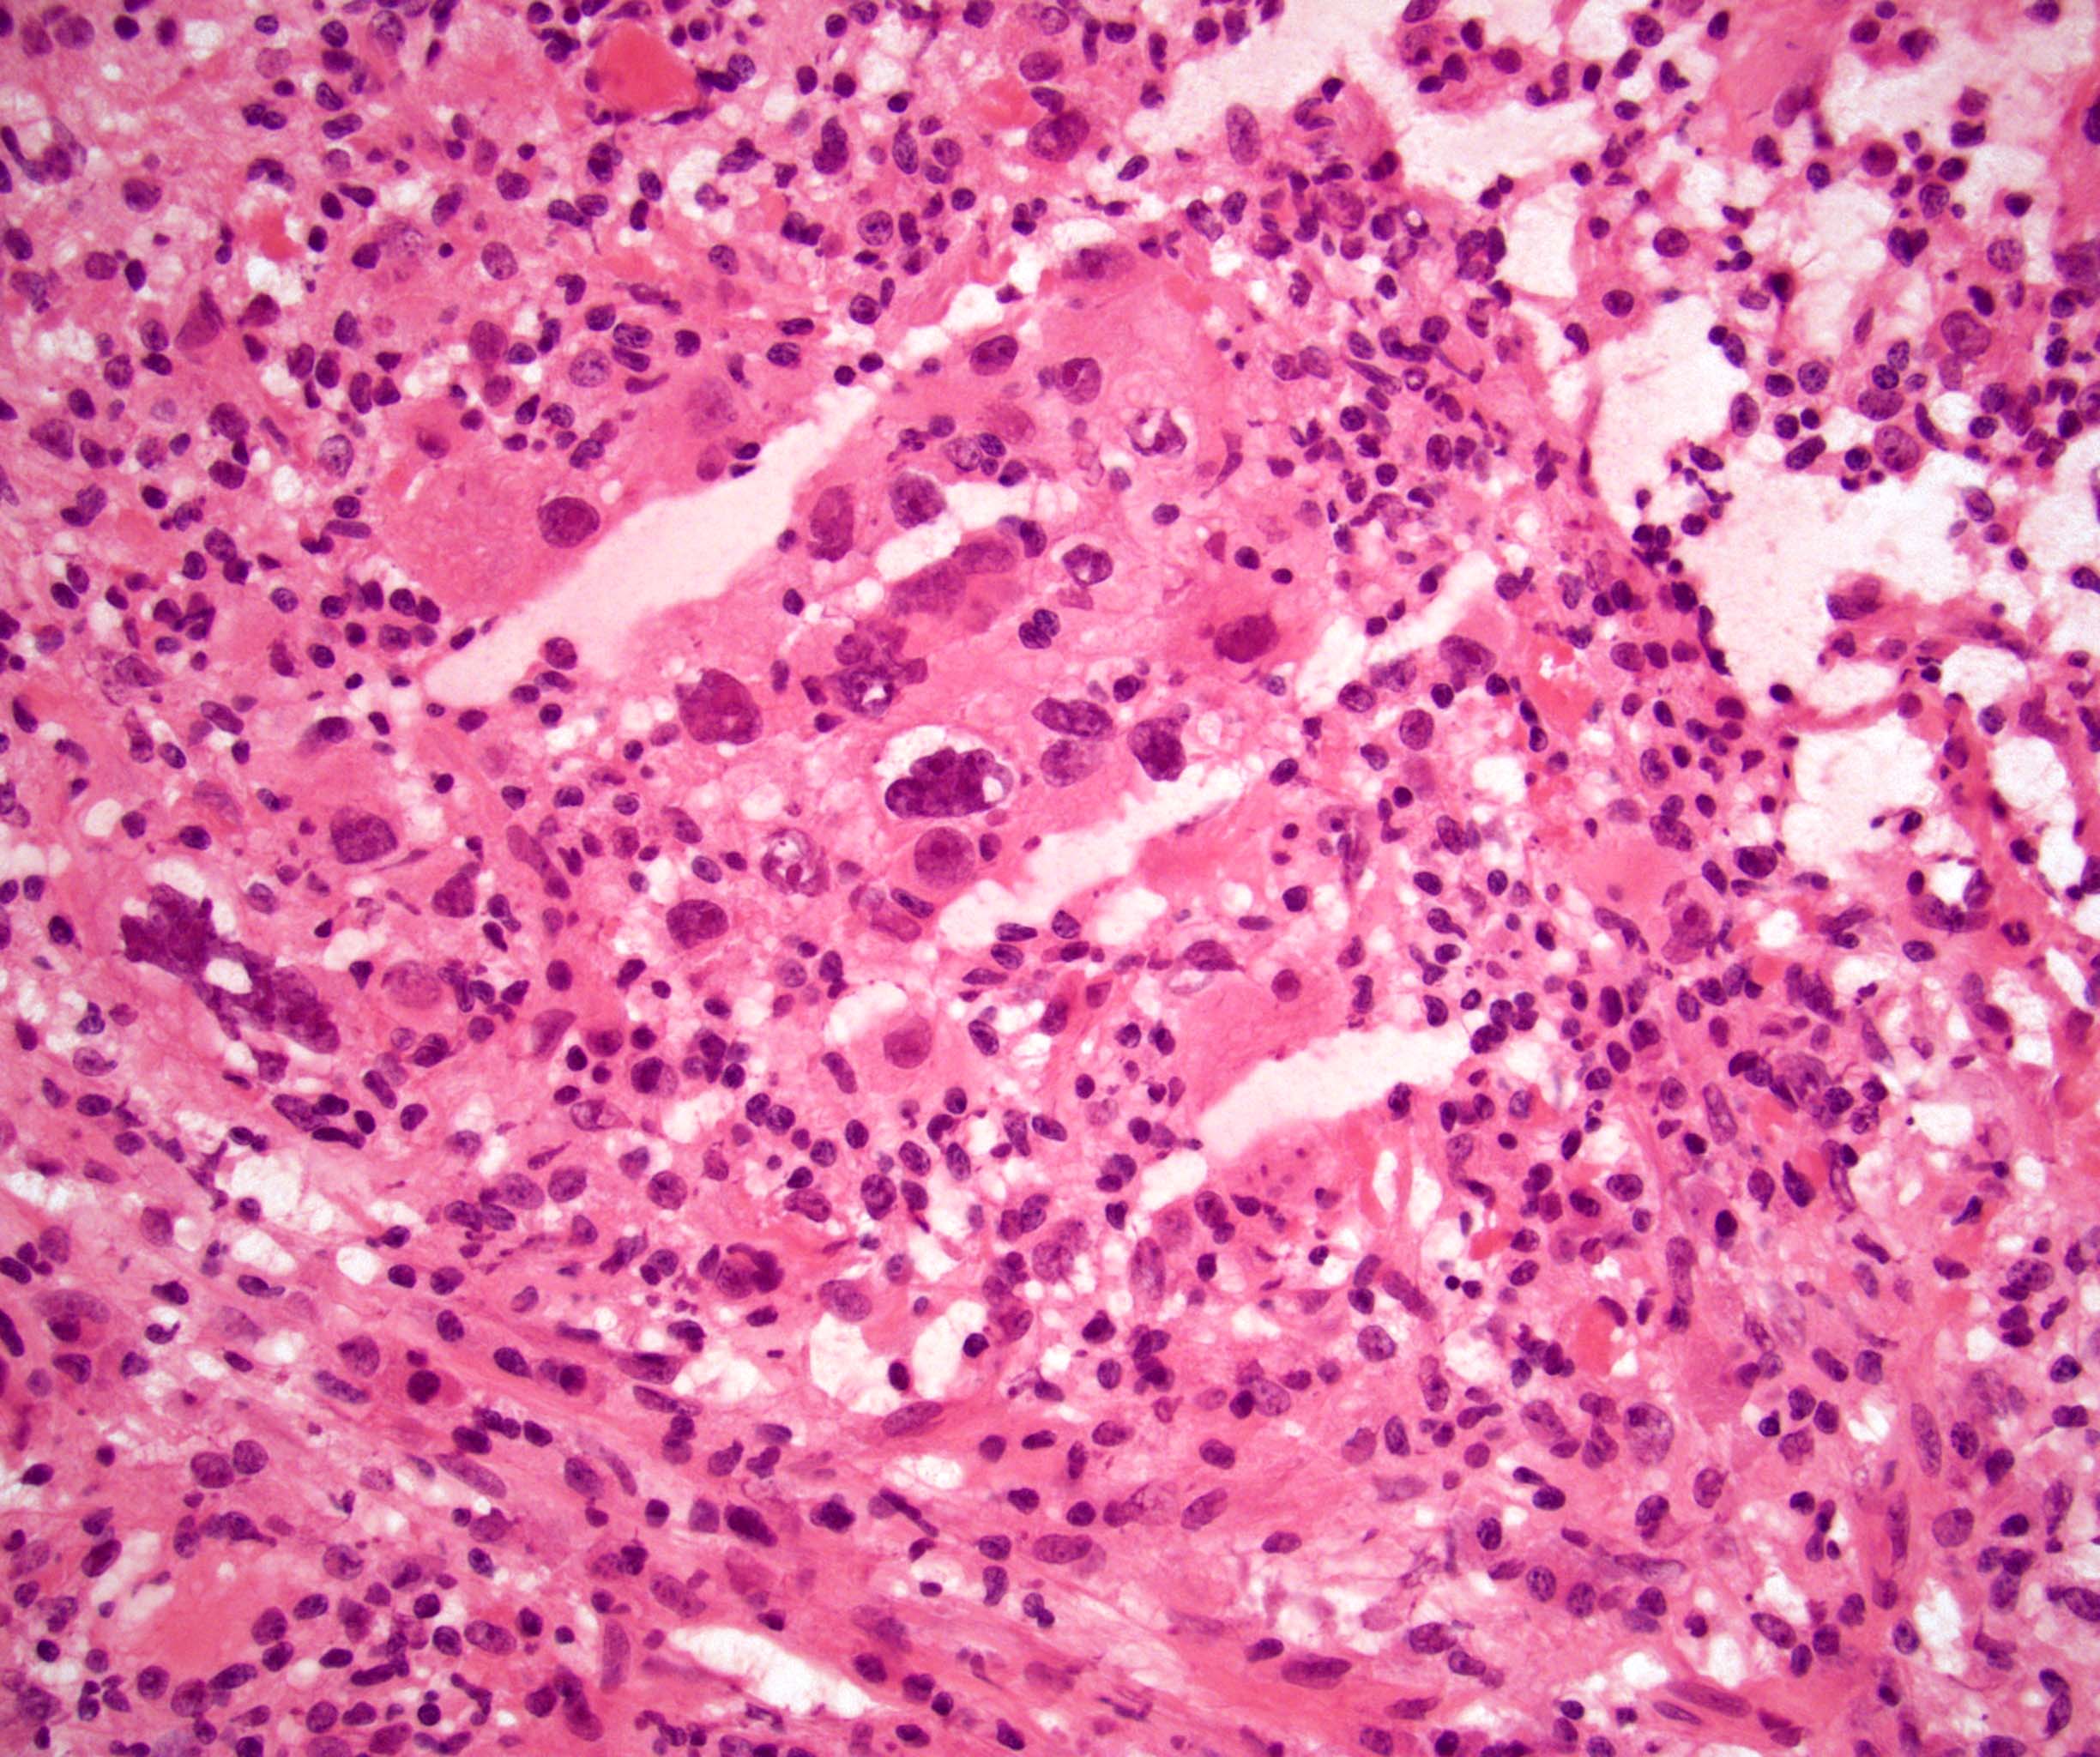 Tumor cell are difficult to identify